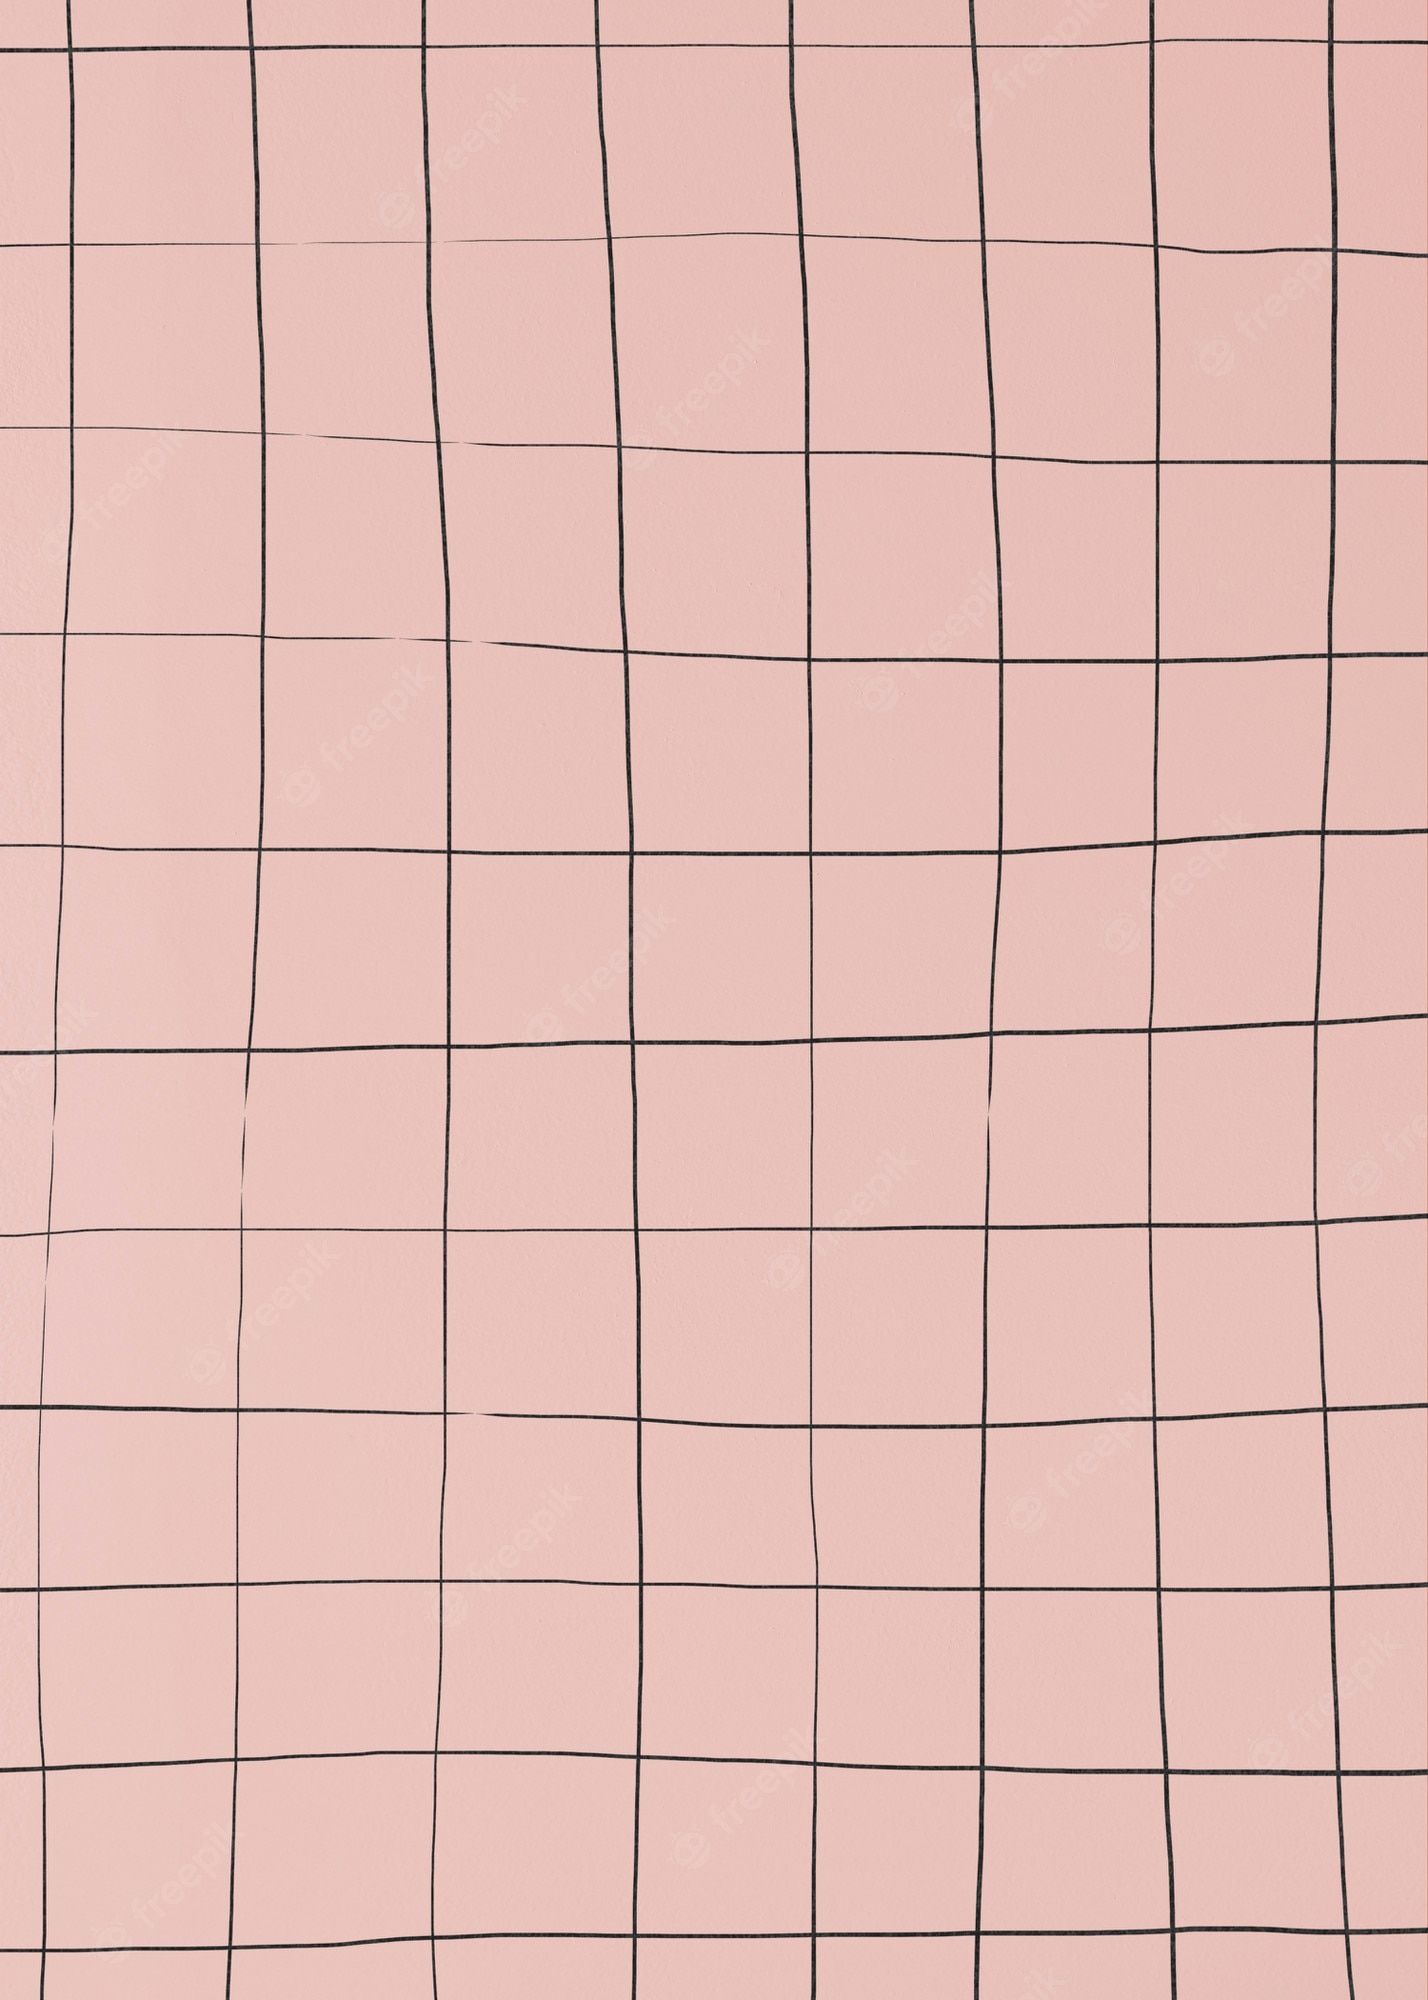 A pink wall with black lines on it - Grid